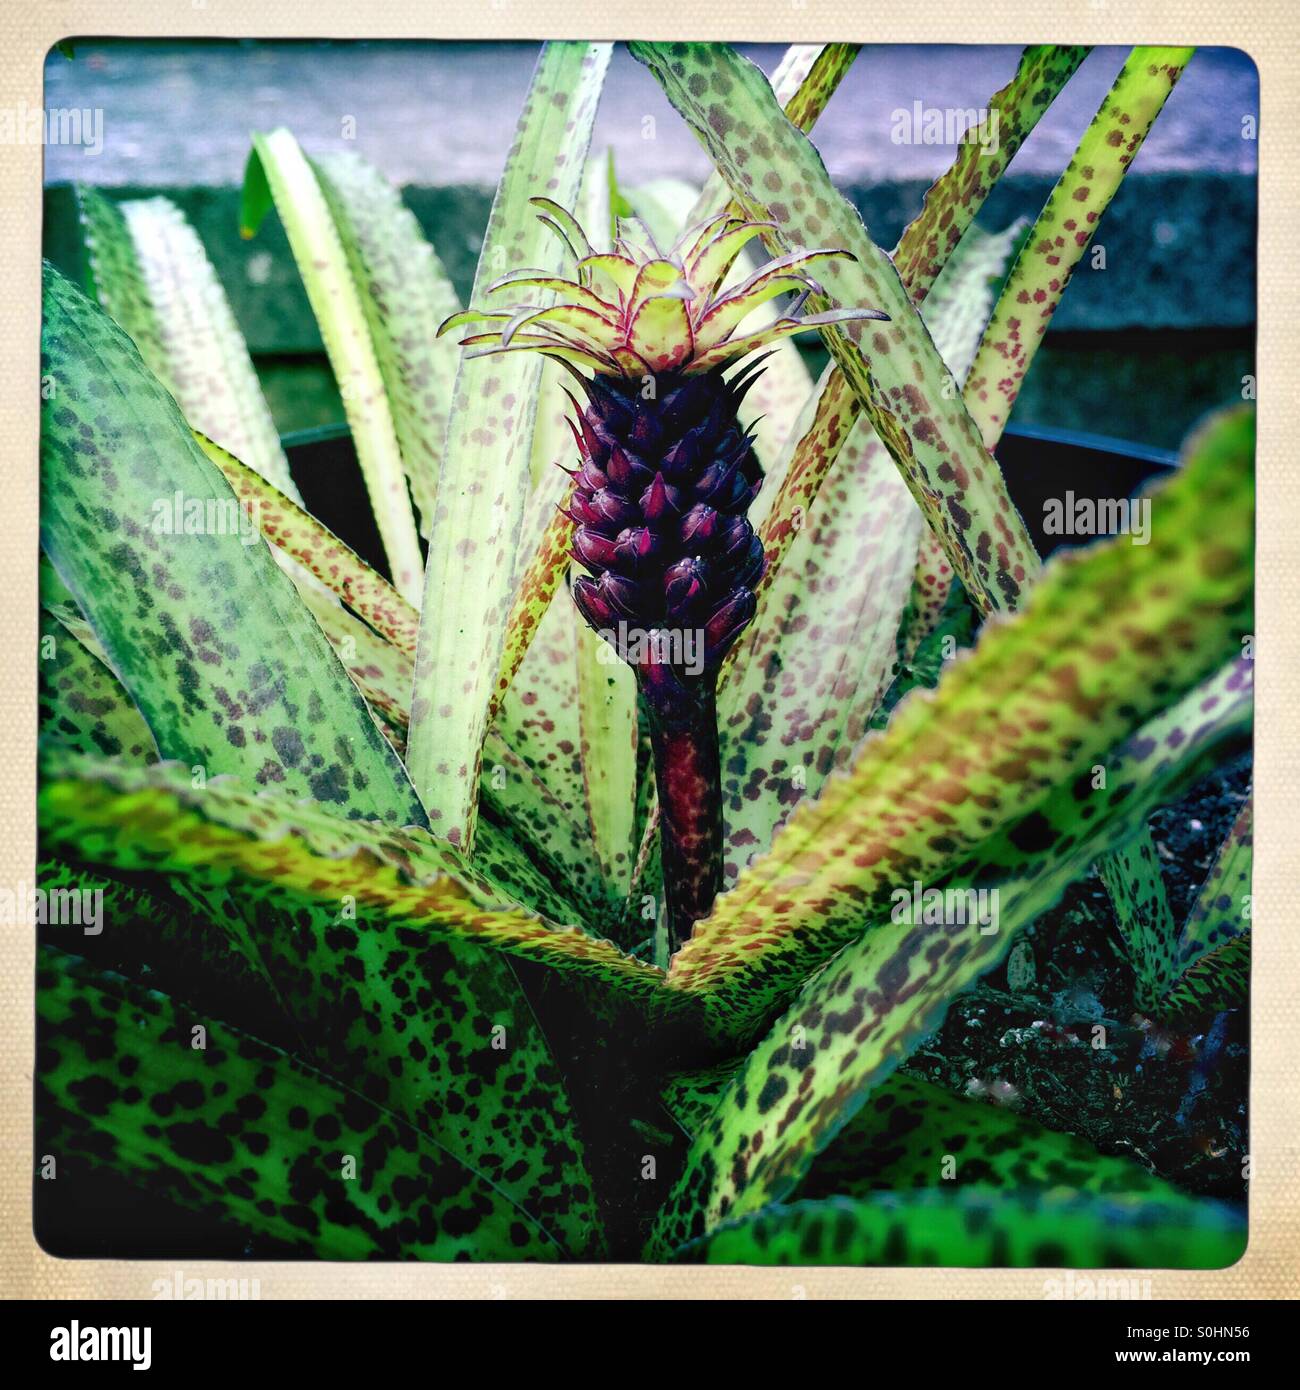 Pineapple Lily or Eucomis vandermerwei, a plant with purple mottled leaves and small pineapple like flower. Stock Photo